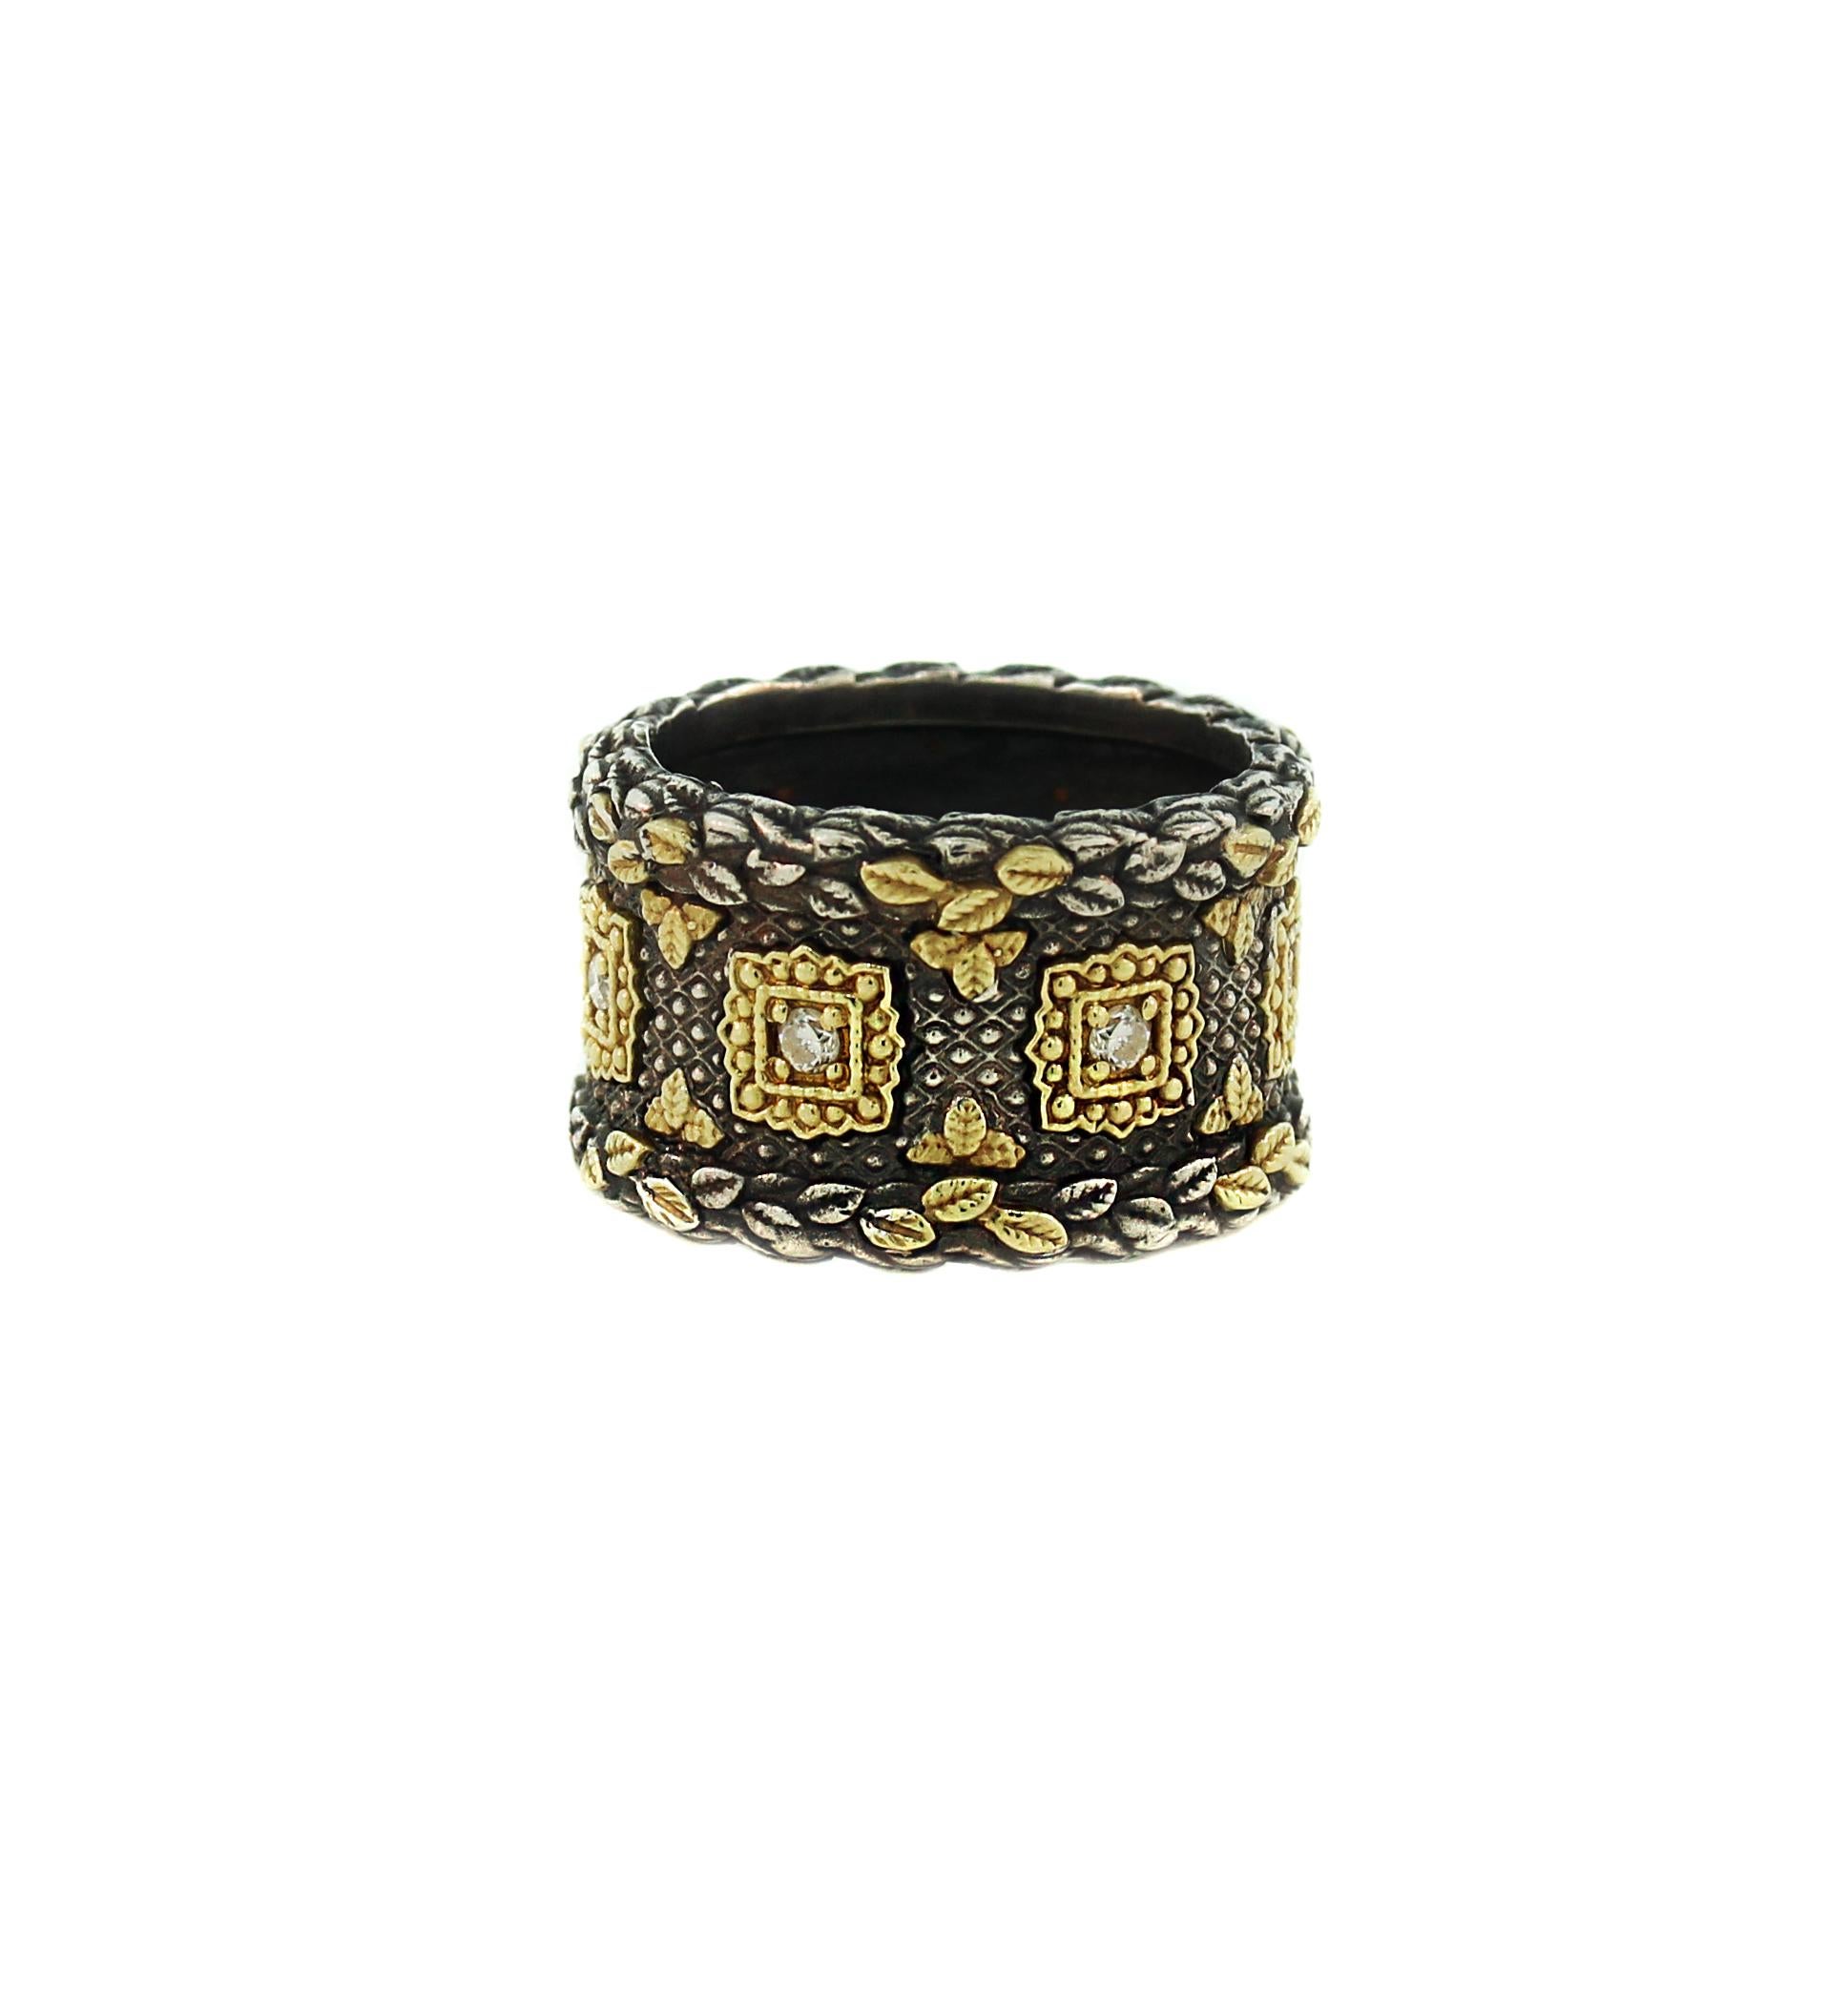 Stambolian Aged Sterling Silver 18K Gold Diamond Wide Cigar Band Ring

0.30 carat diamonds total weight

Ring is done in darkened Aged Silver with touches of solid 18K Gold all throughout

Band width is 0.6 inch (15.25mm)

Available in sizes 4-12.